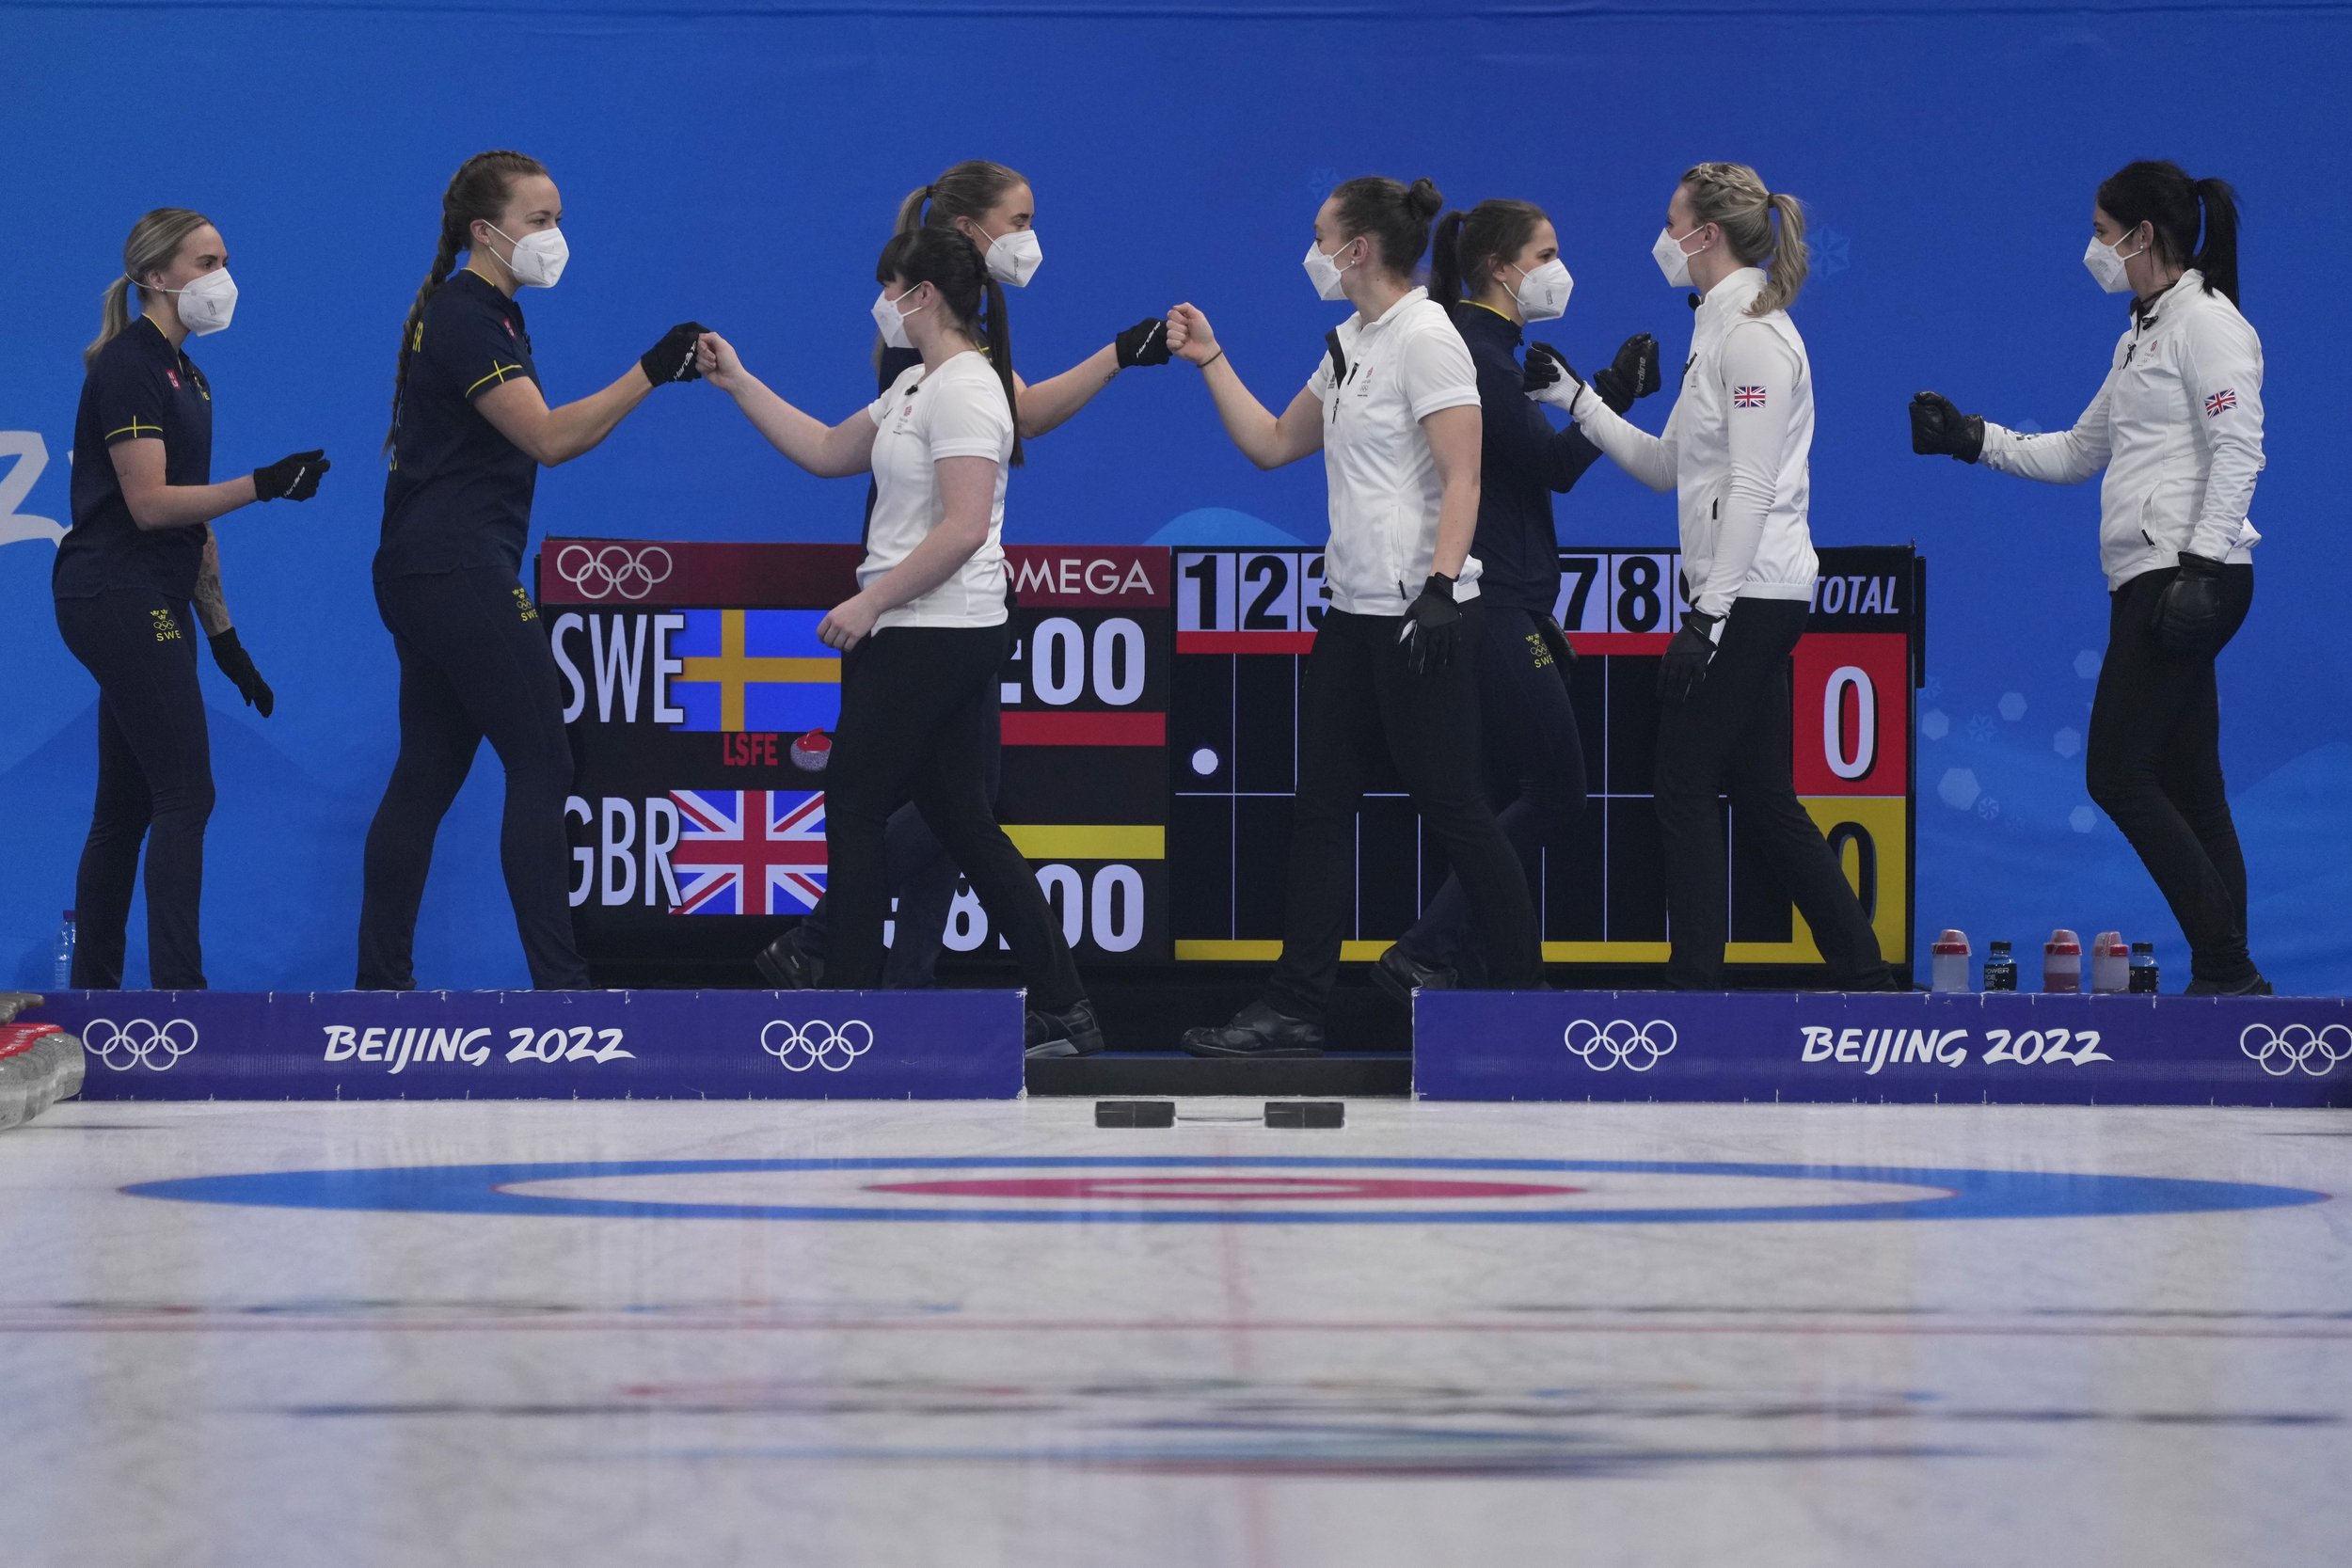  Team Sweden, in blue, and Britain greet each other before the start of the women's curling semifinal match between Britain and Sweden at the Beijing Winter Olympics Friday, Feb. 18, 2022, in Beijing. (AP Photo/Nariman El-Mofty) 